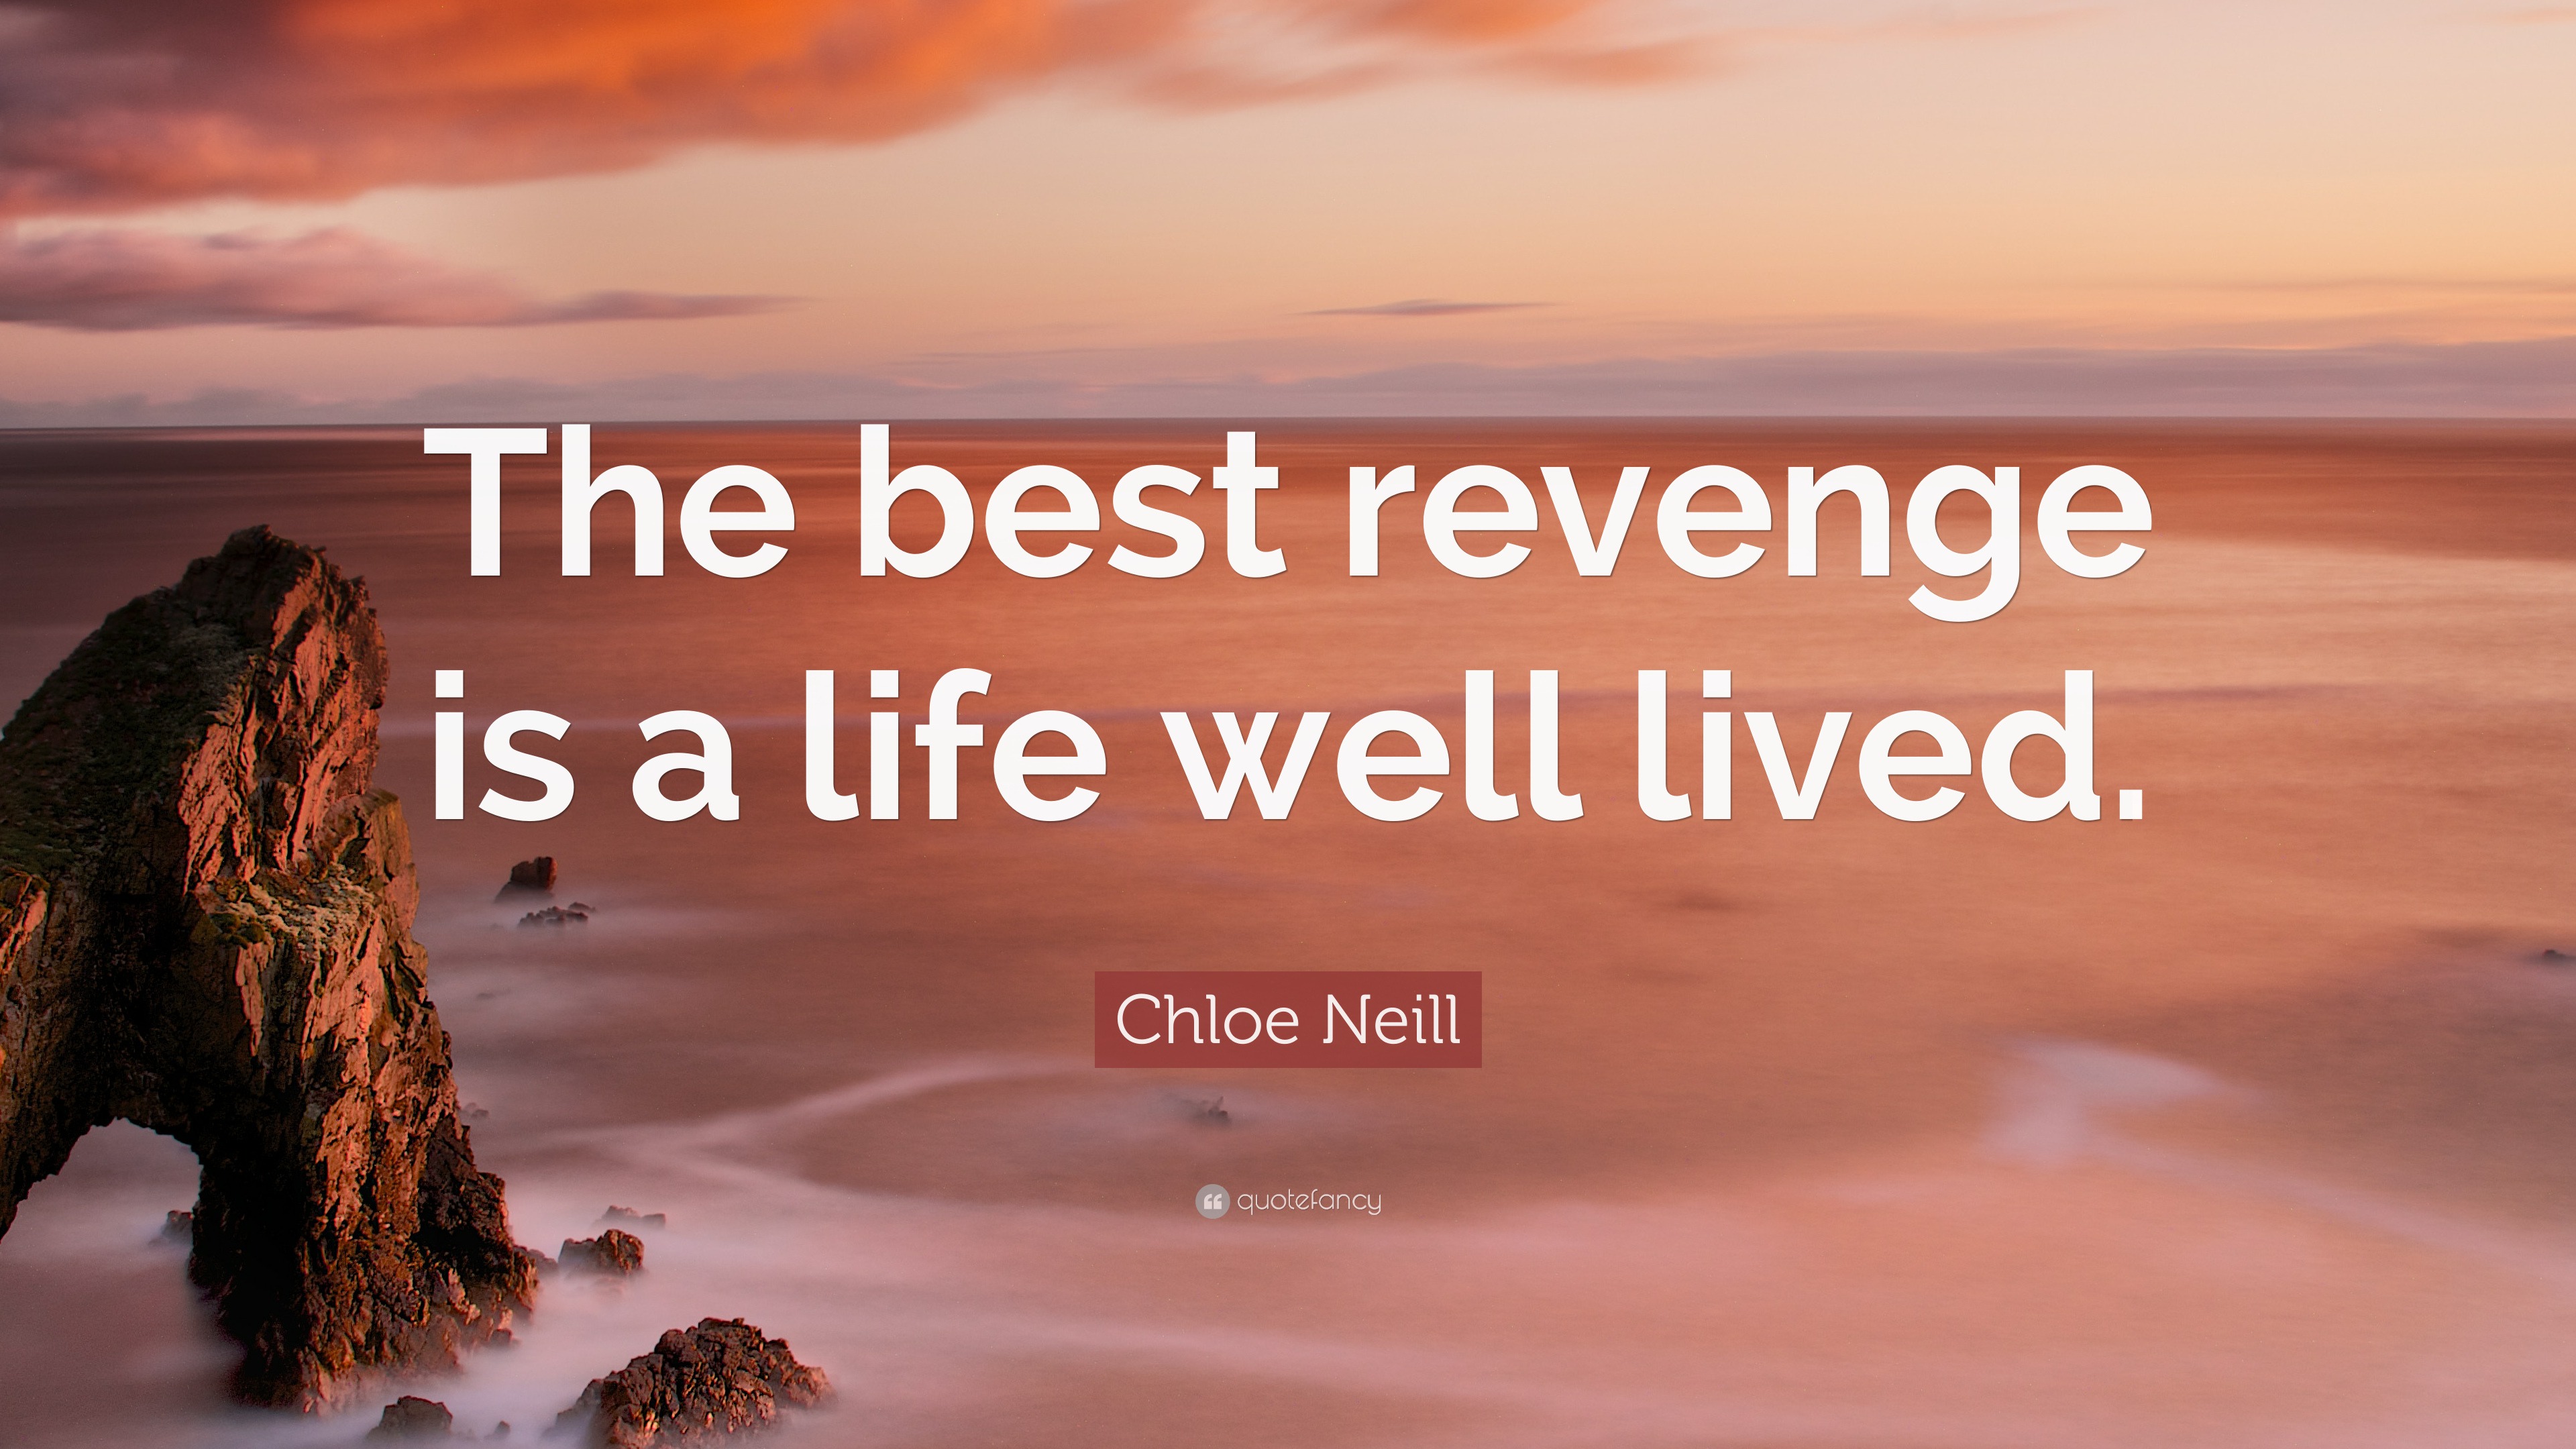 Chloe Neill Quote “The best revenge is a life well lived ”